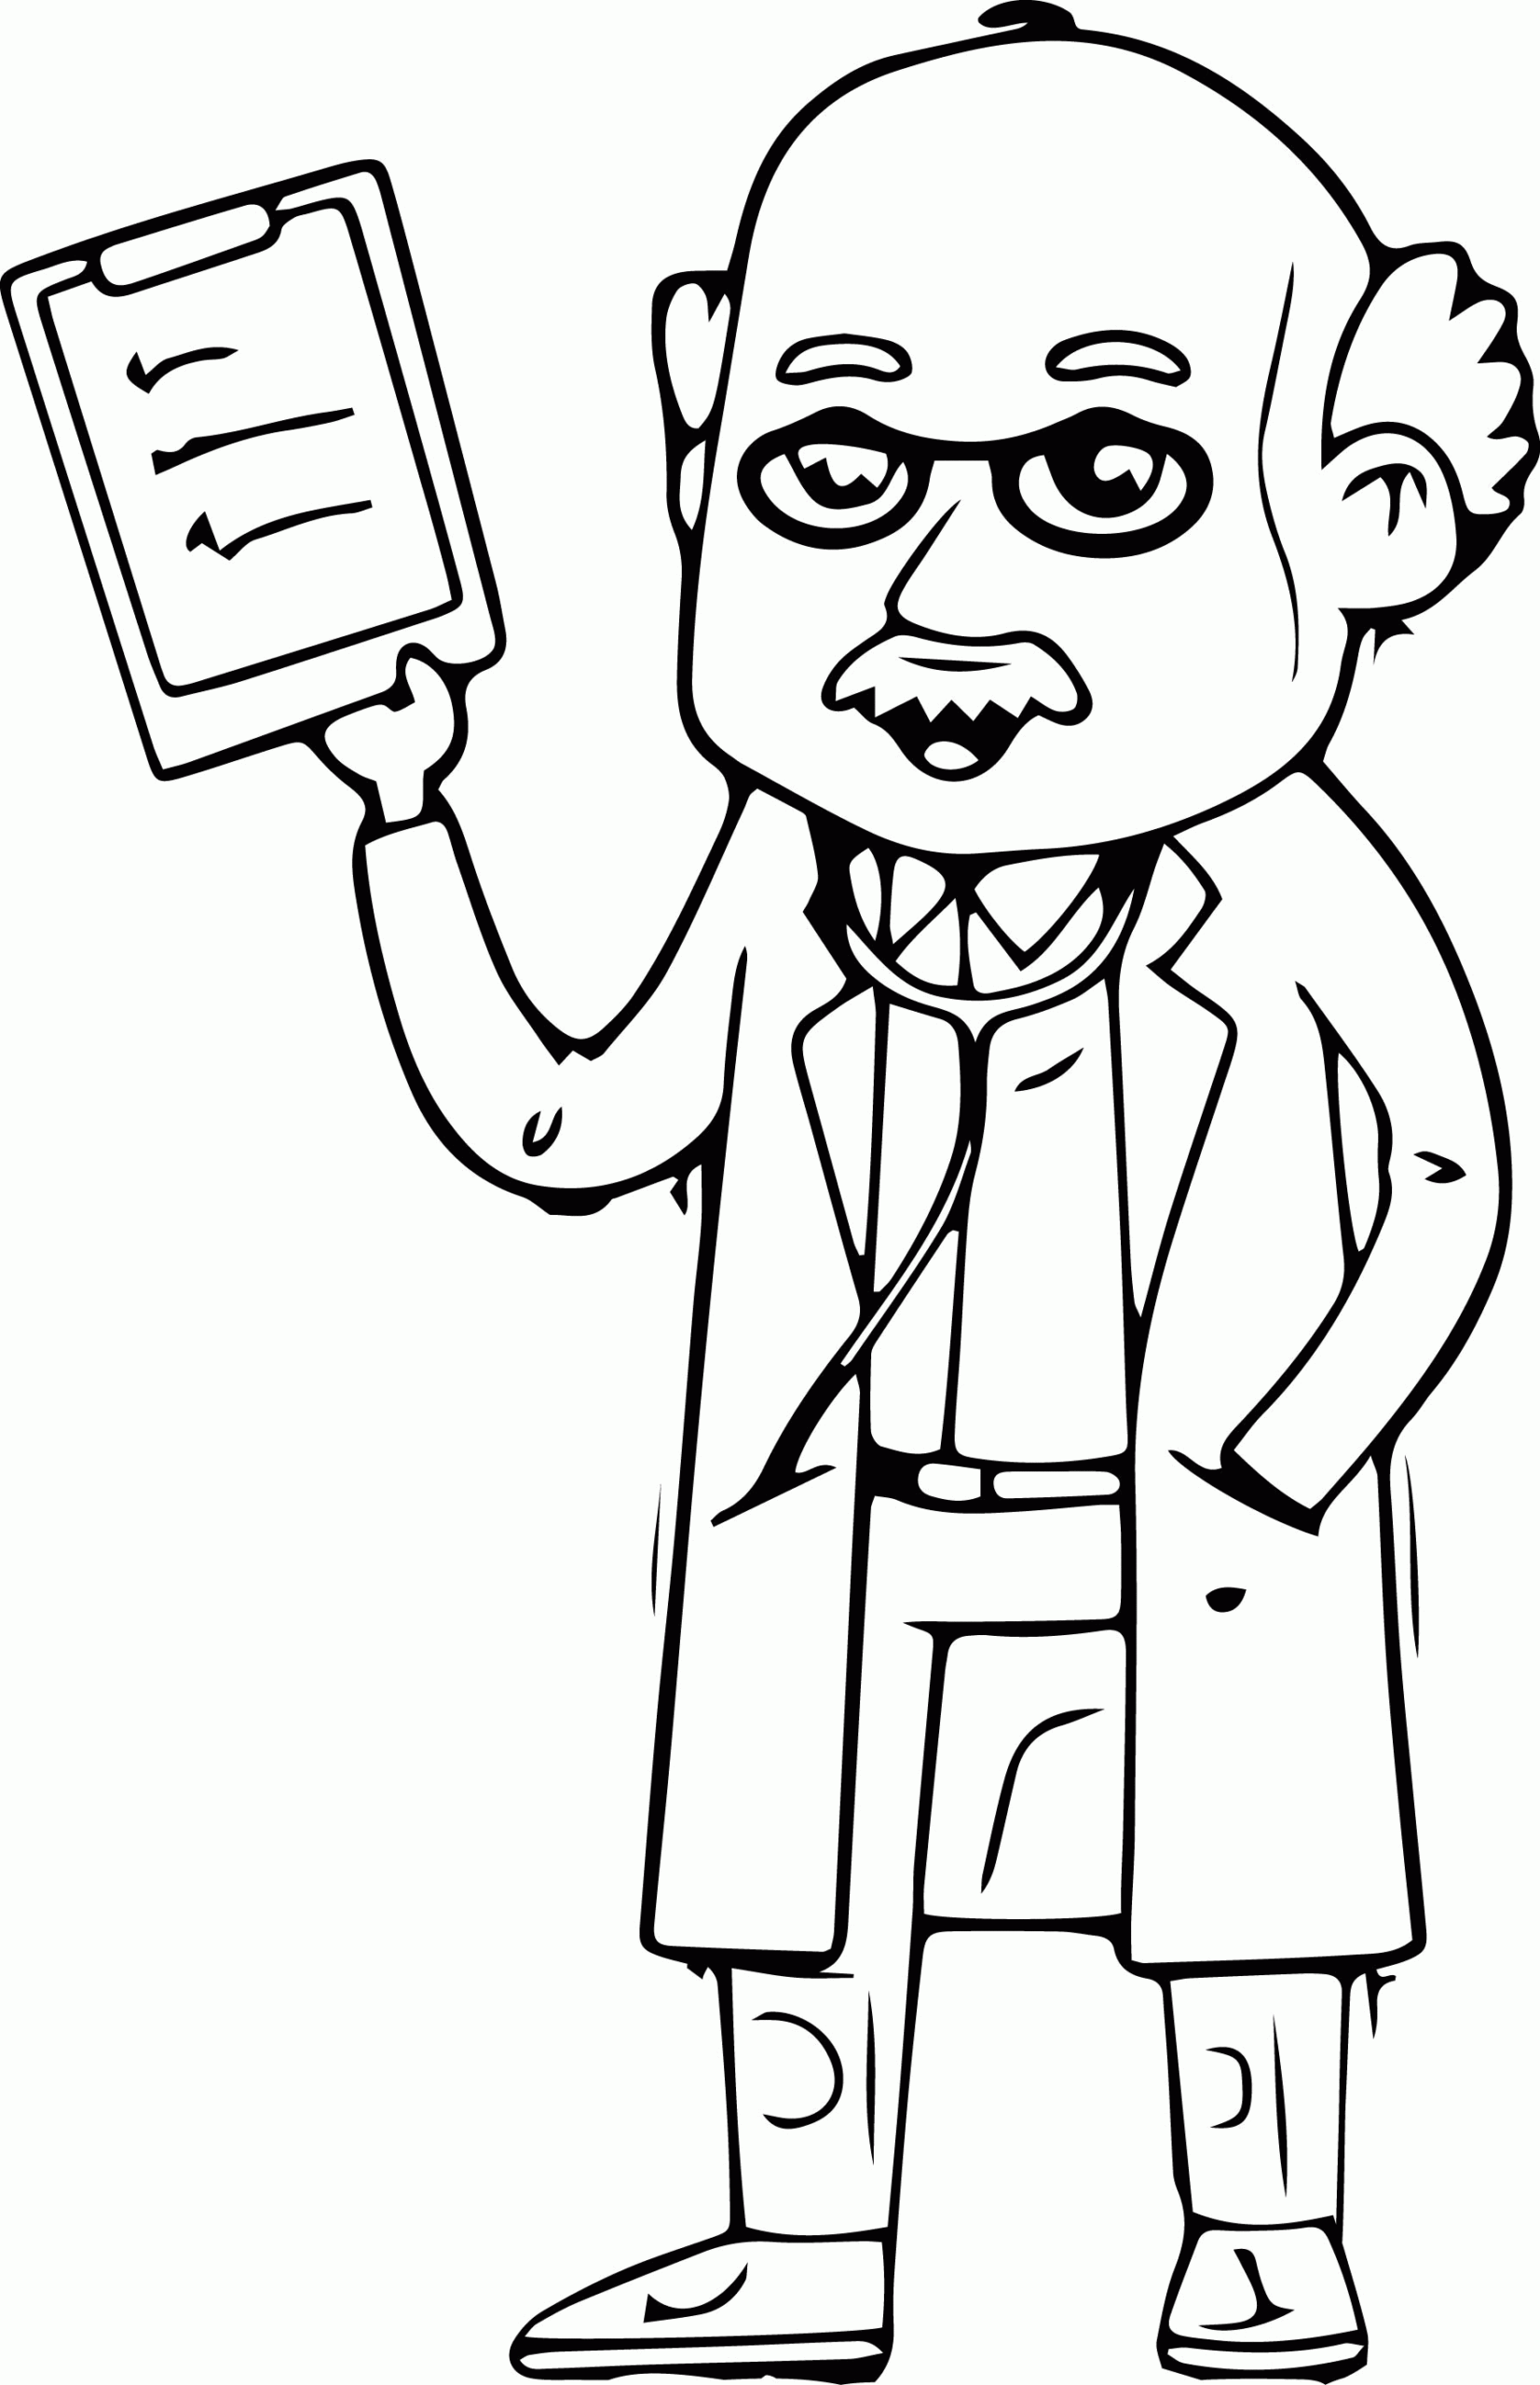 A Doctor Coloring Page Printable Sheets Doctor We Page 10 2021 a 0236 Coloring4free